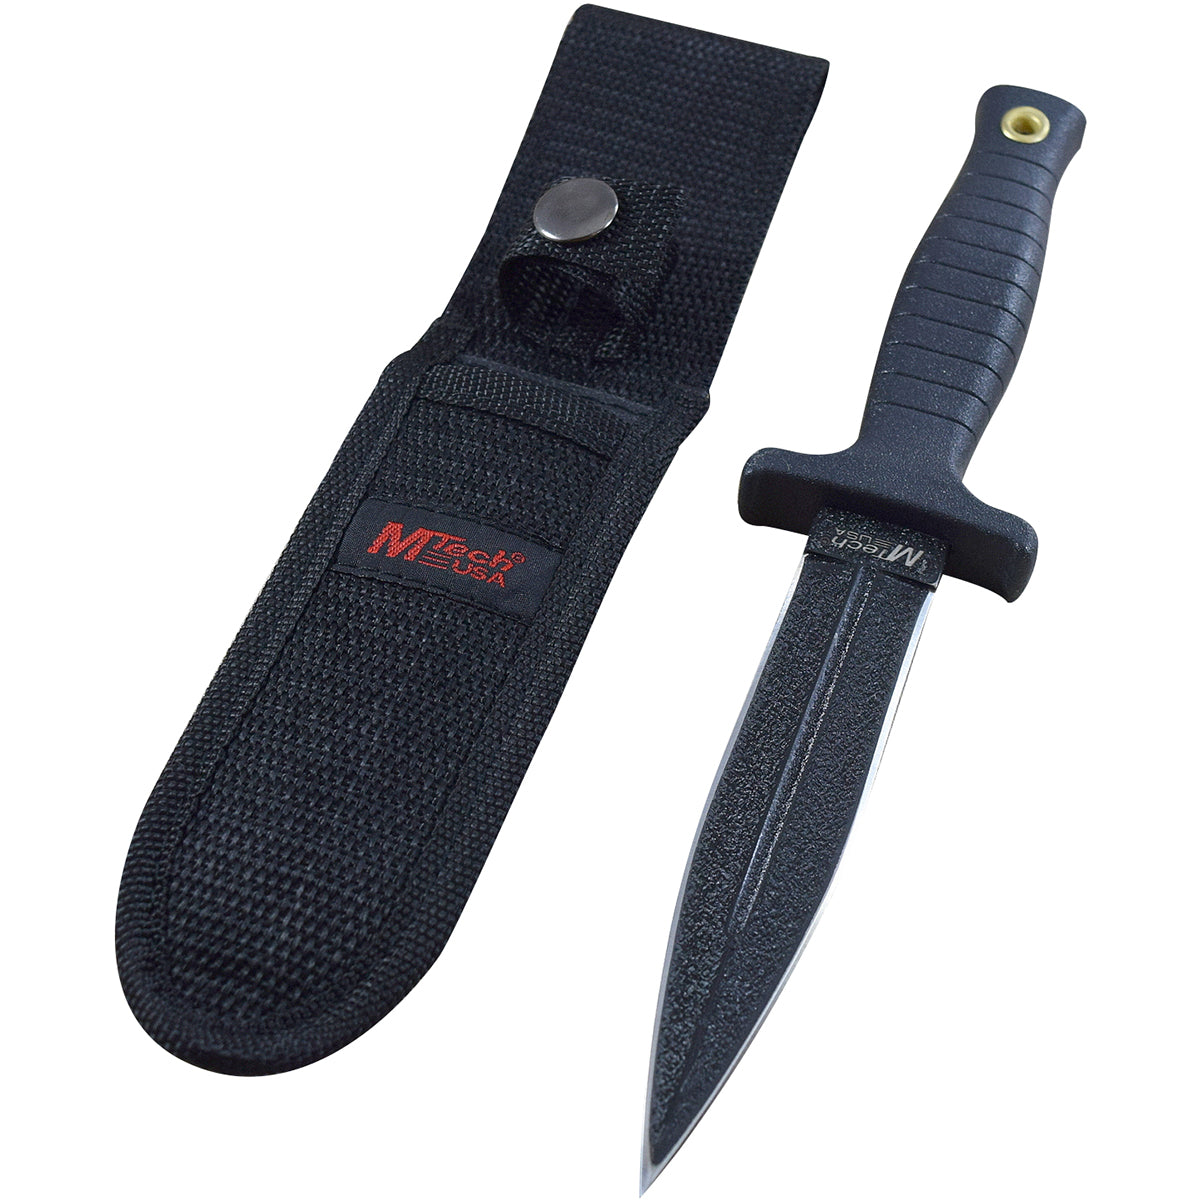 MTech USA Fixed Blade Boot Knife, Double Edged, 9" Overall, Black, MT-097 M-Tech